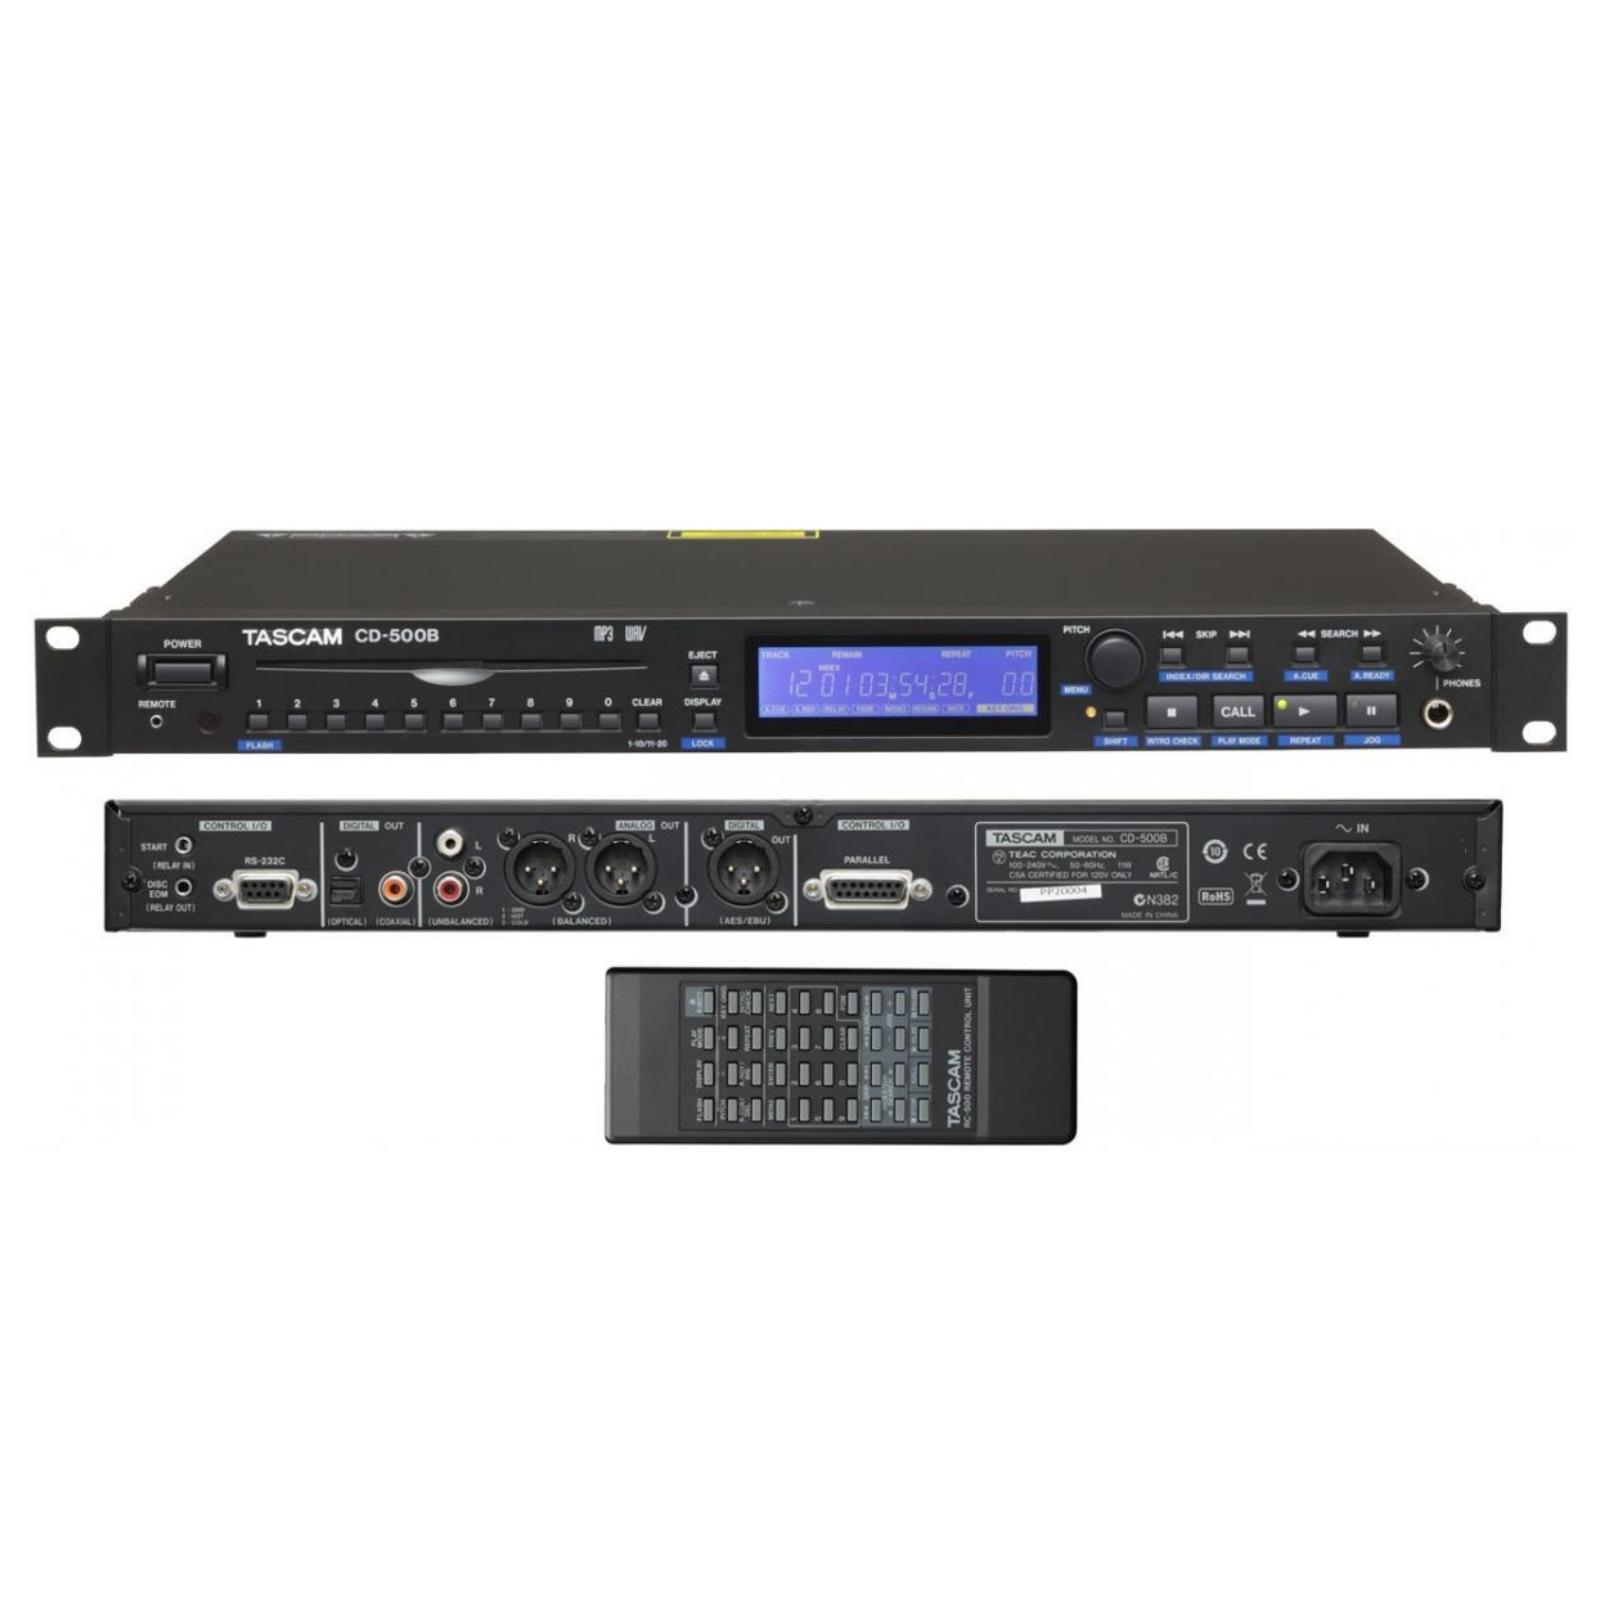 Tascam professional CD player with balanced outputs (1U) – Amber